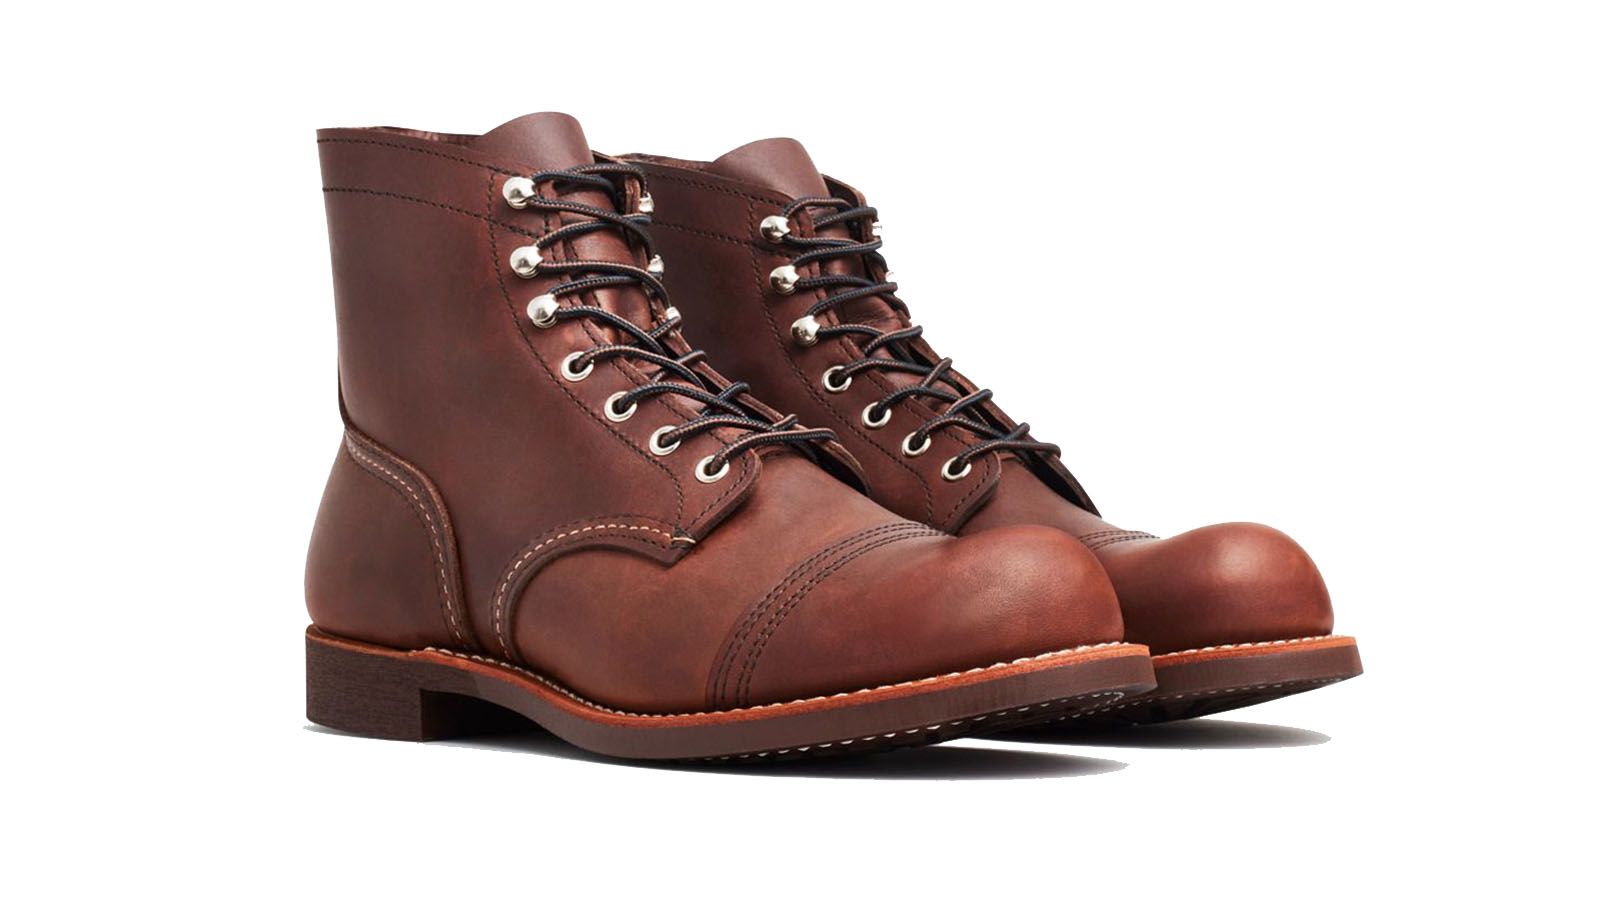 How To Wear Red Wing Boots - Men's Style Tips & Outfit Advice